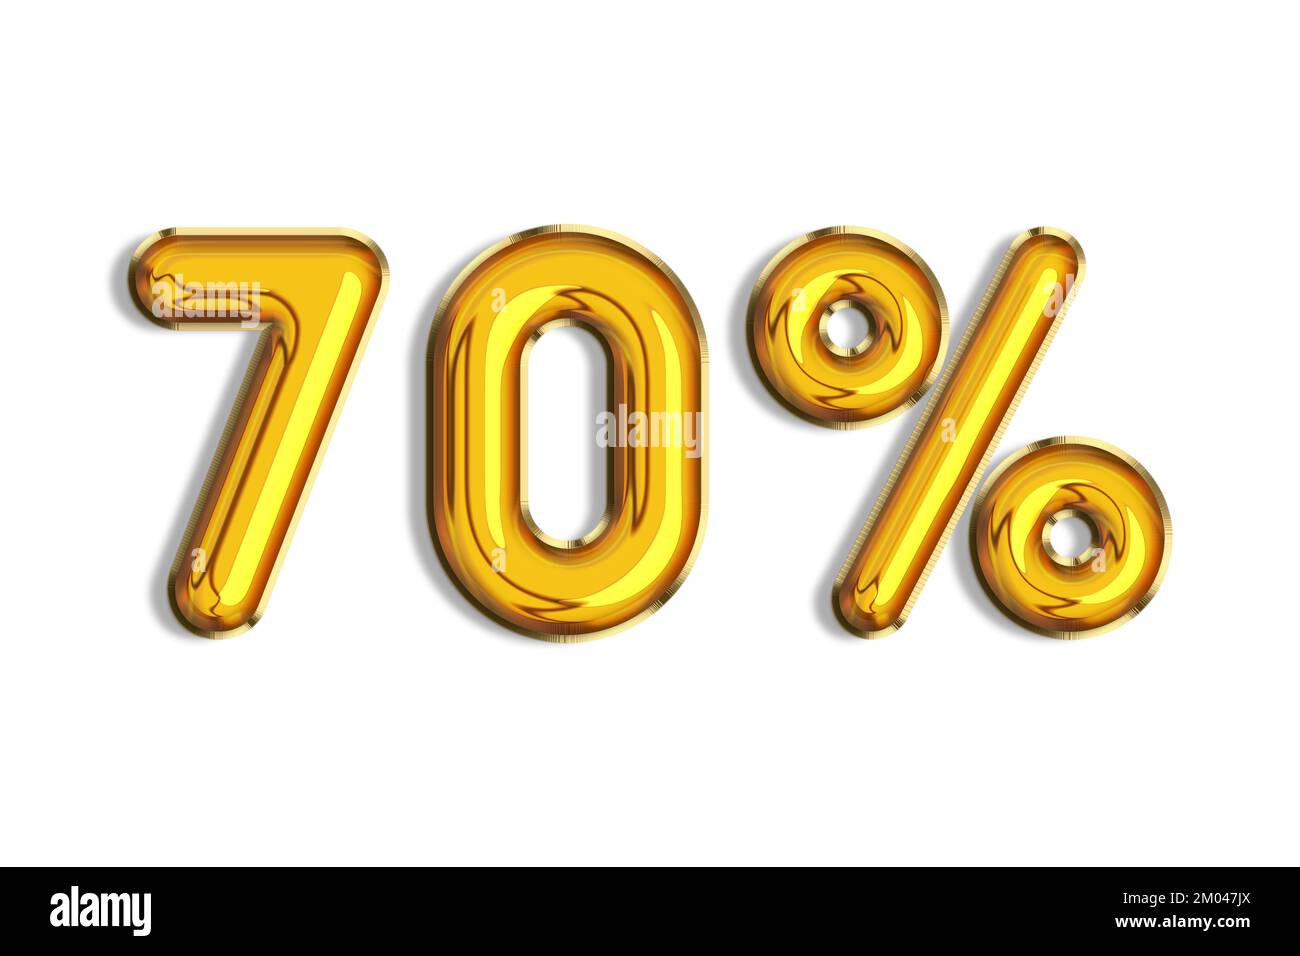 70% off discount promotion sale made of realistic 3d gold helium balloons. Illustration of golden percent symbols for selling poster, banner, ads. Num Stock Photo